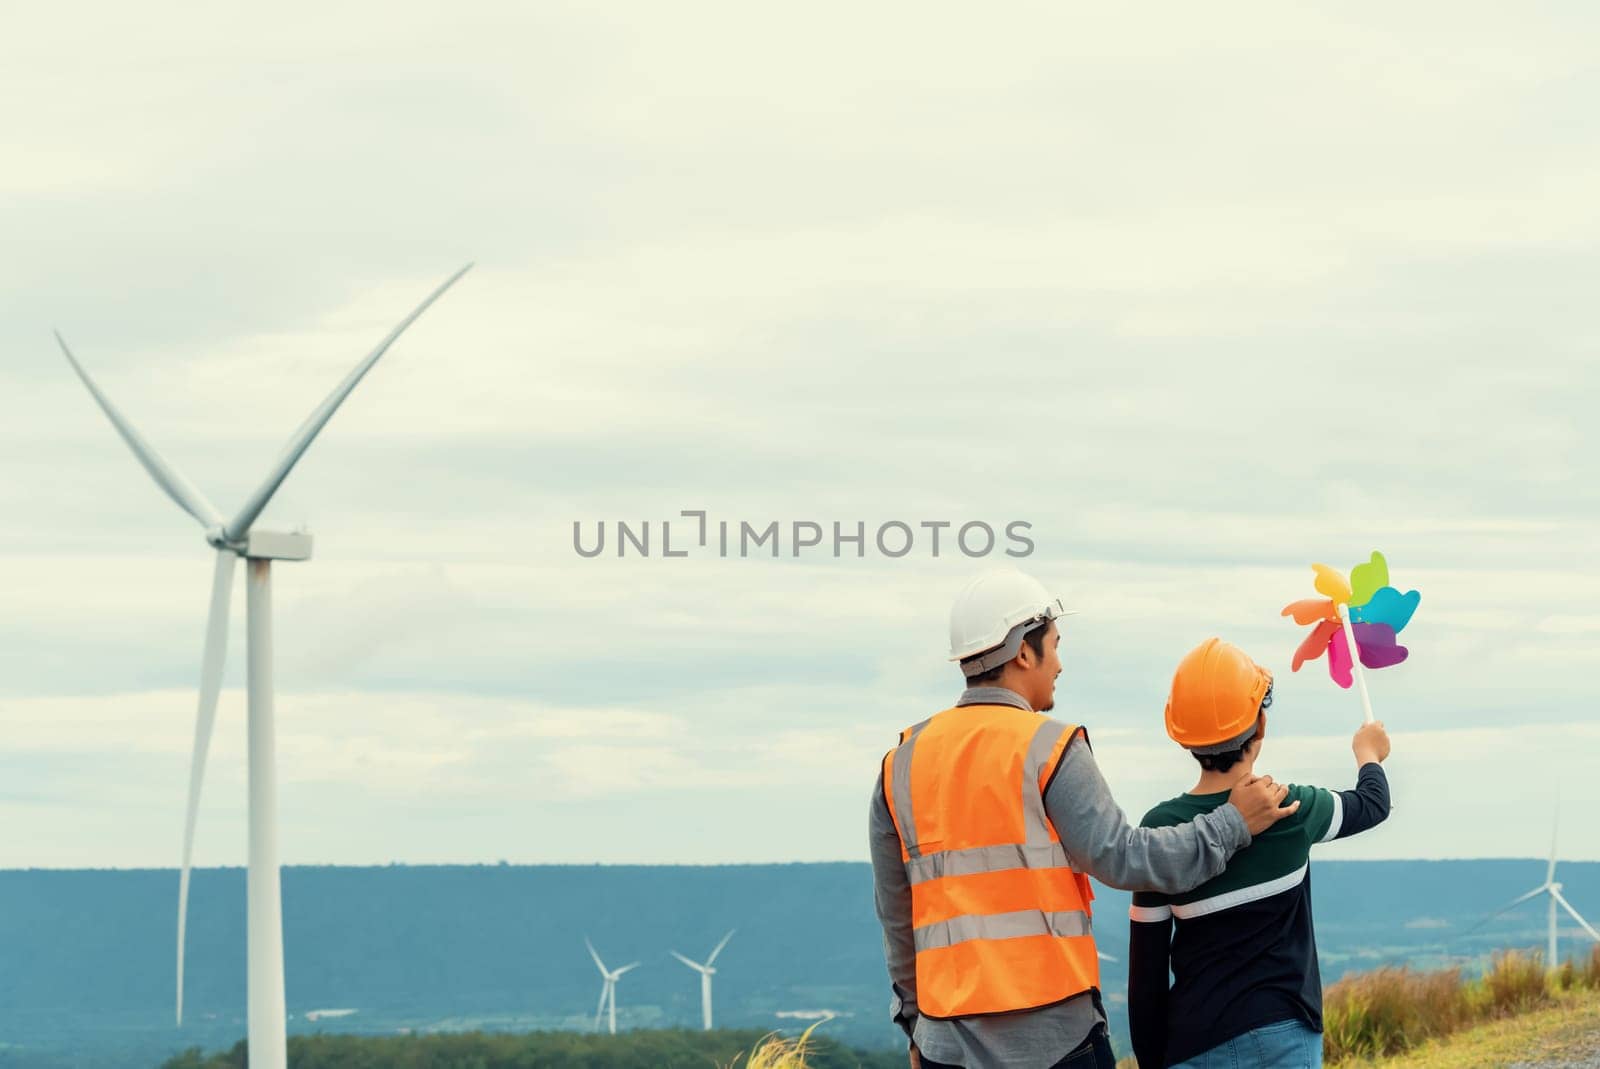 Engineer with his son holding windmill toy on a wind farm atop a hill or mountain. Progressive ideal for the future production of renewable, sustainable energy. Energy generated from wind turbine.